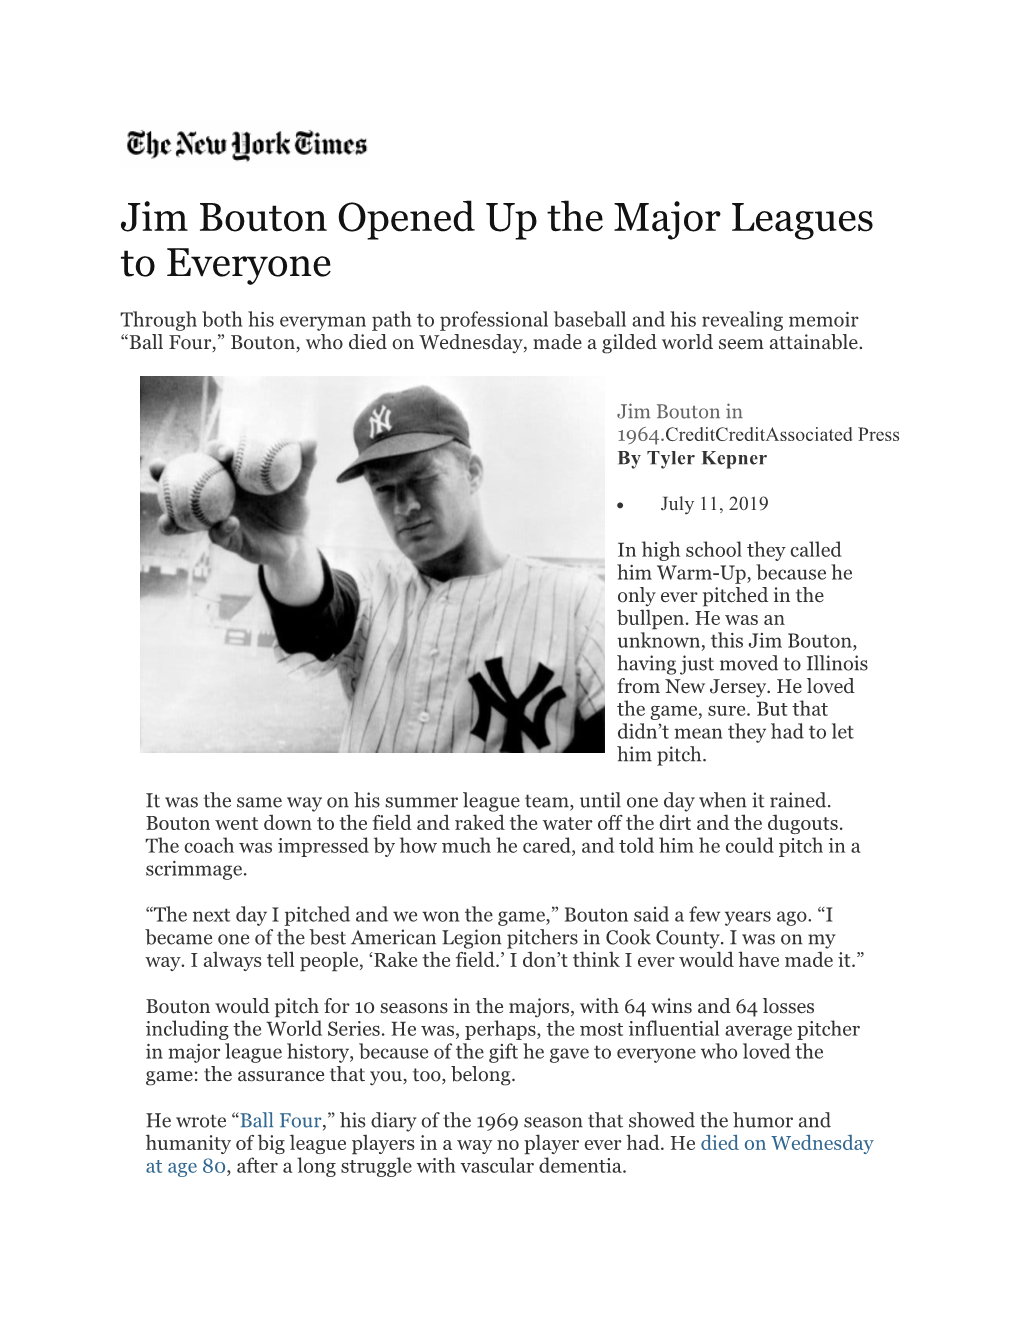 Jim Bouton Opened up the Major Leagues to Everyone